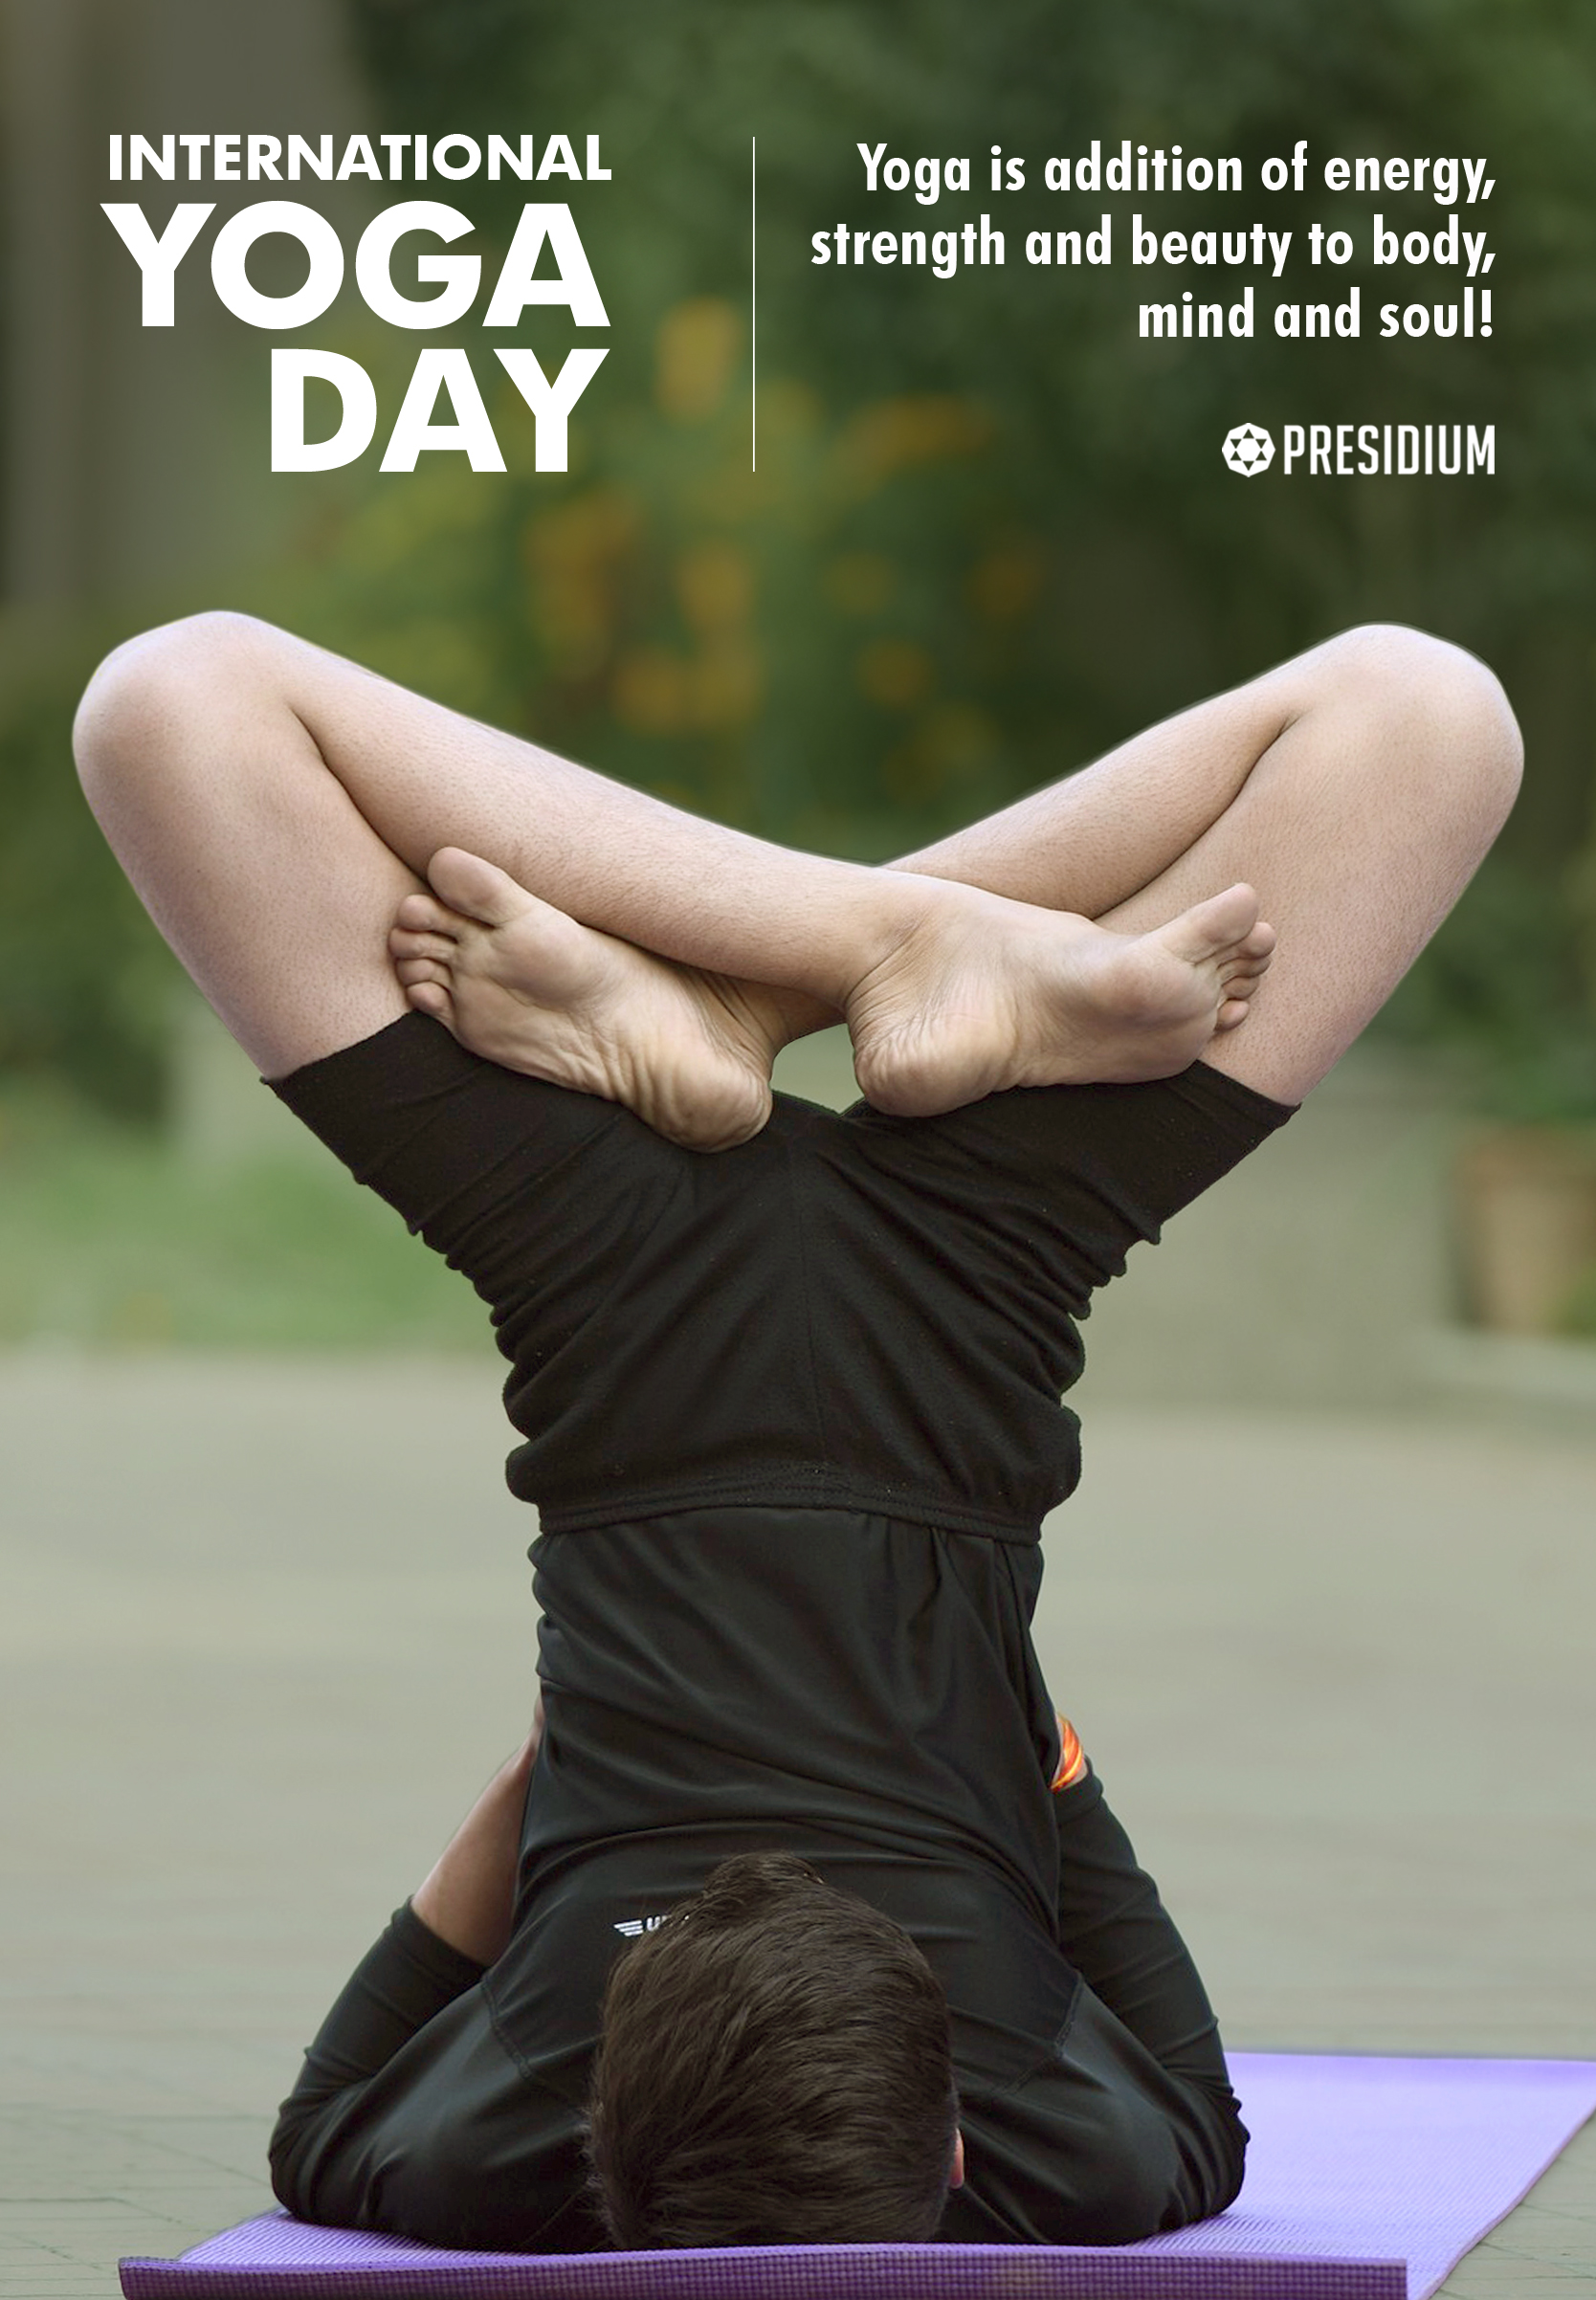 HAPPY WORLD YOGA DAY: LET'S TRAIL THE LIGHT OF SELF-AWARENESS